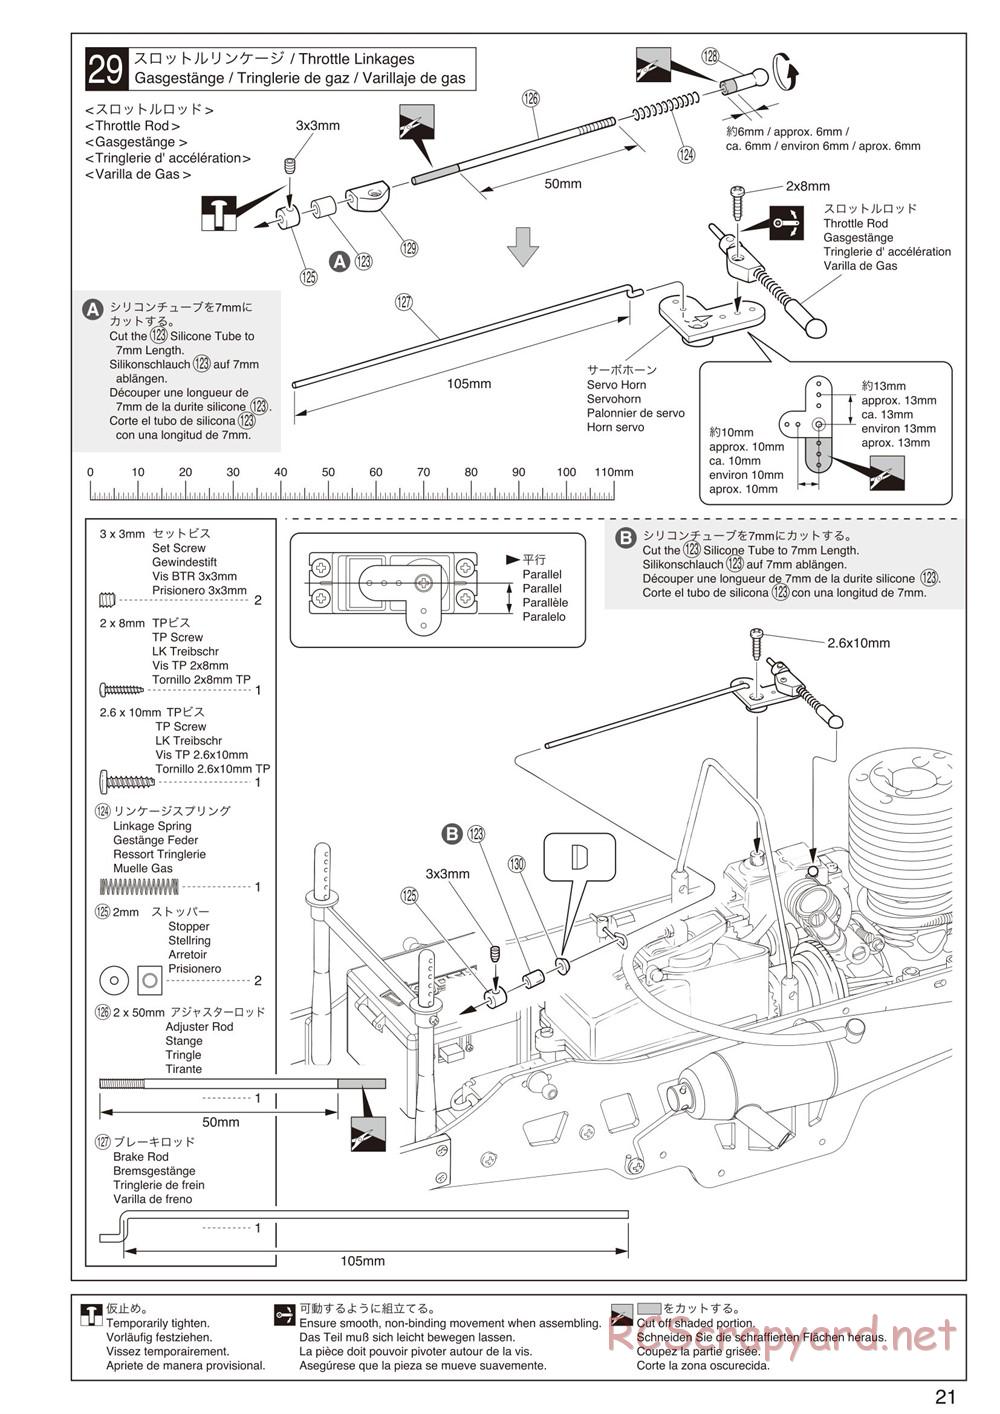 Kyosho - Mad Force Kruiser 2.0 - Manual - Page 21